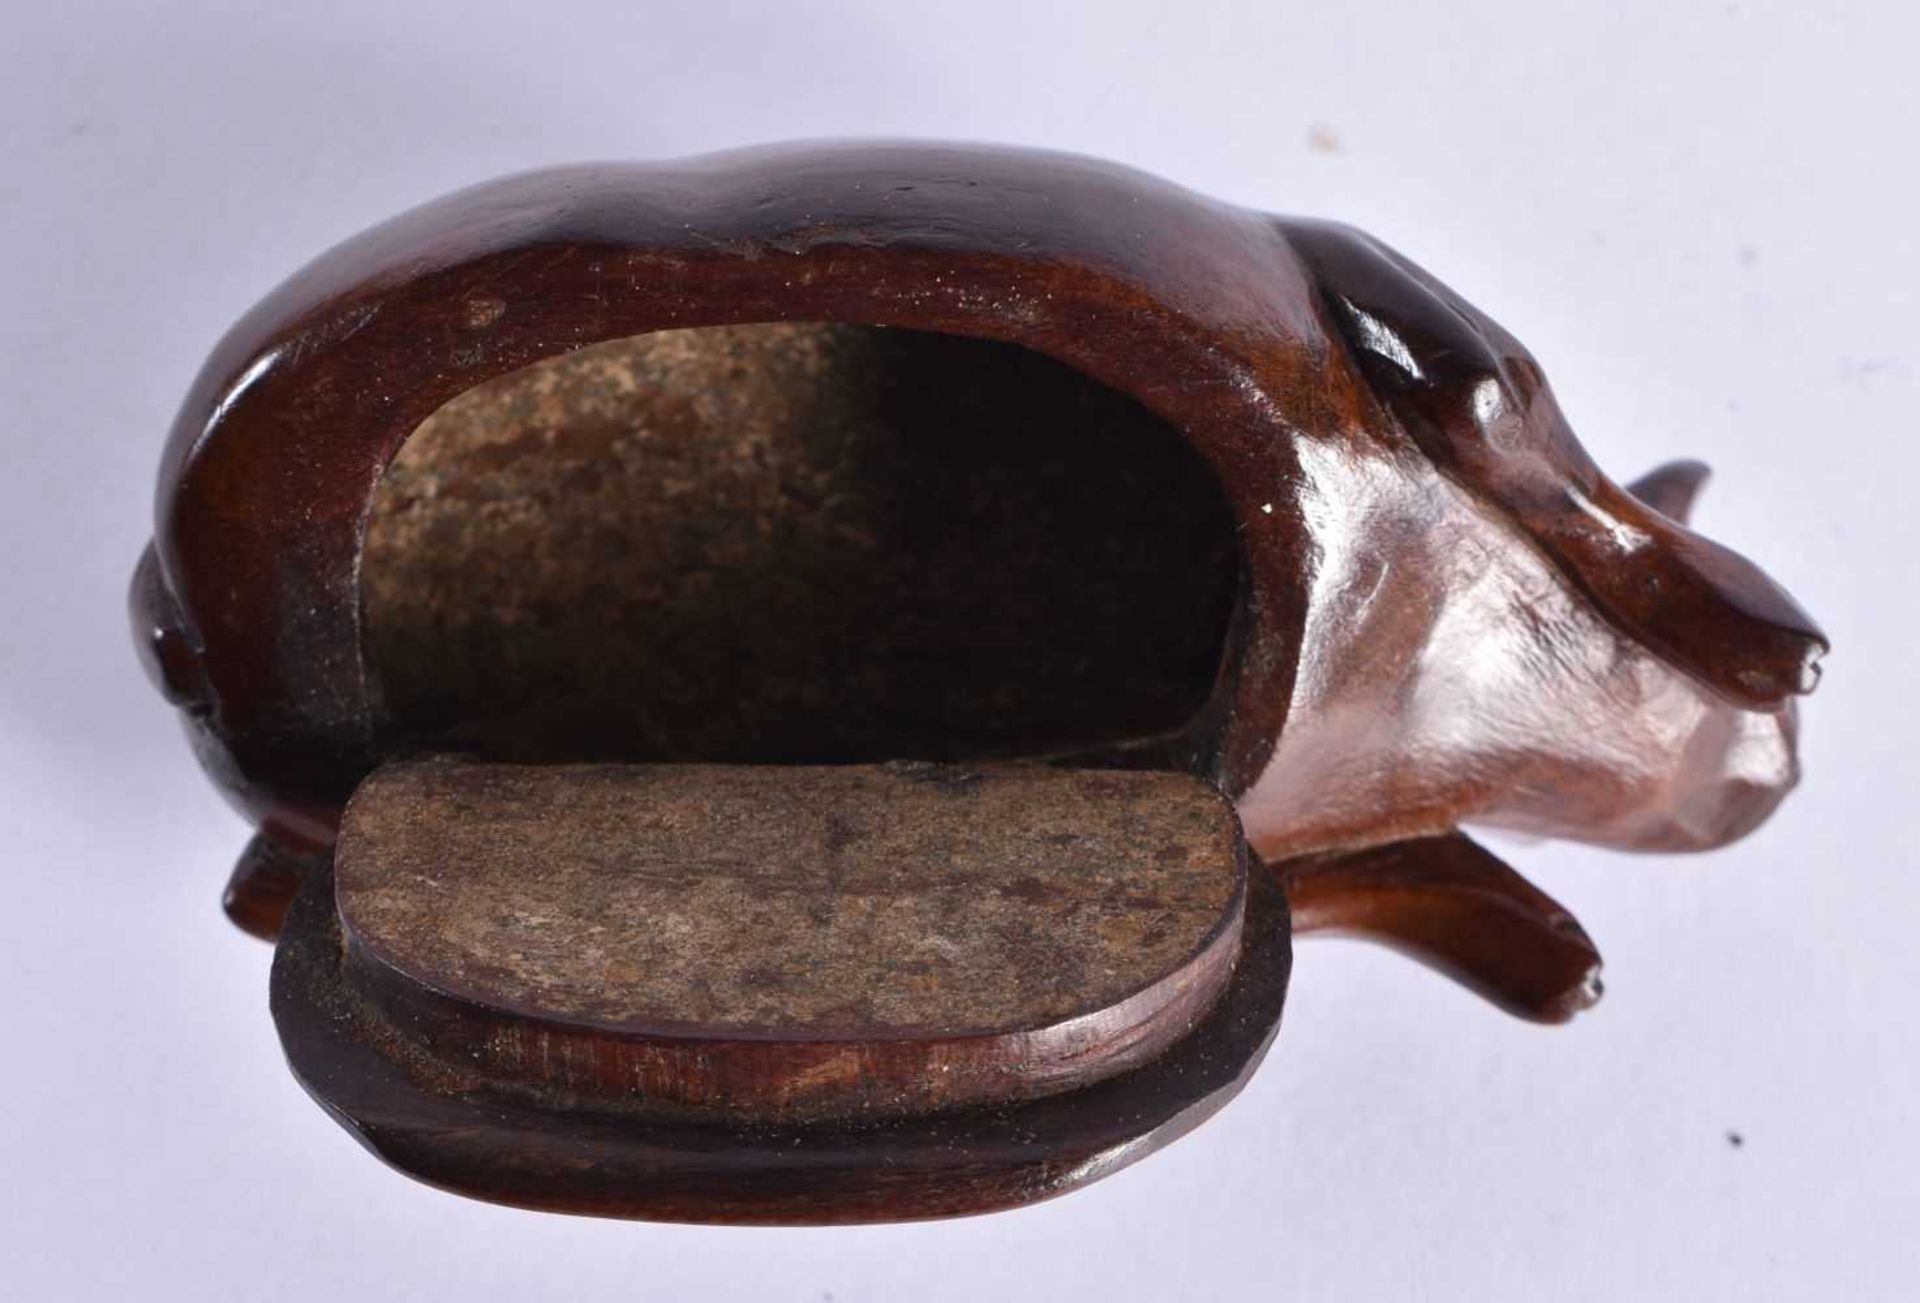 A LATE 18TH CENTURY CARVED TREEN WOOD SNUFF BOX formed as a stylised animals, with mouth open and - Image 5 of 6